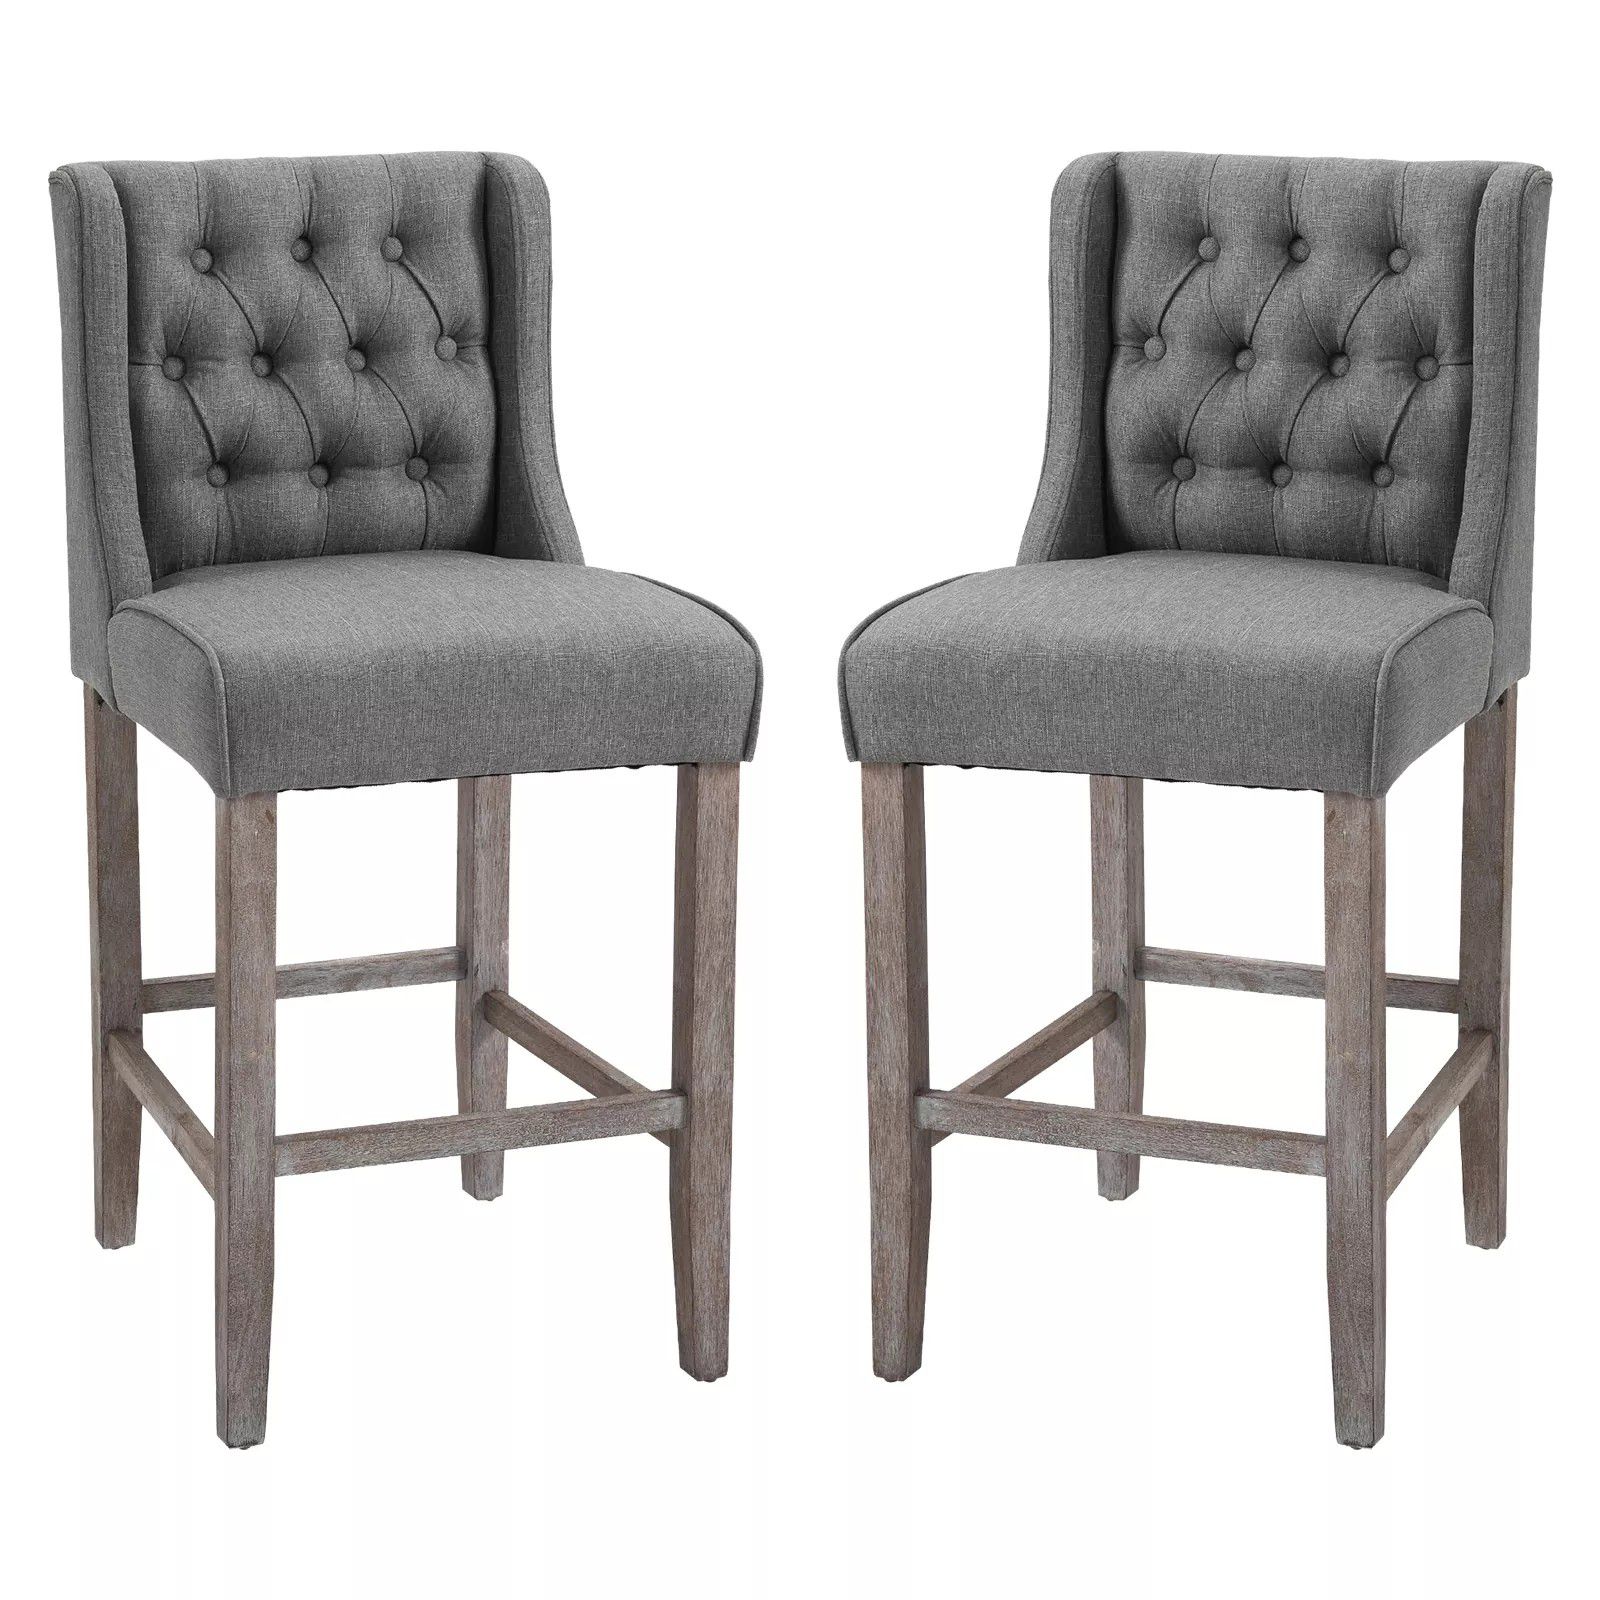 2 Tufted Bar Stool Dining Chairs - Grey